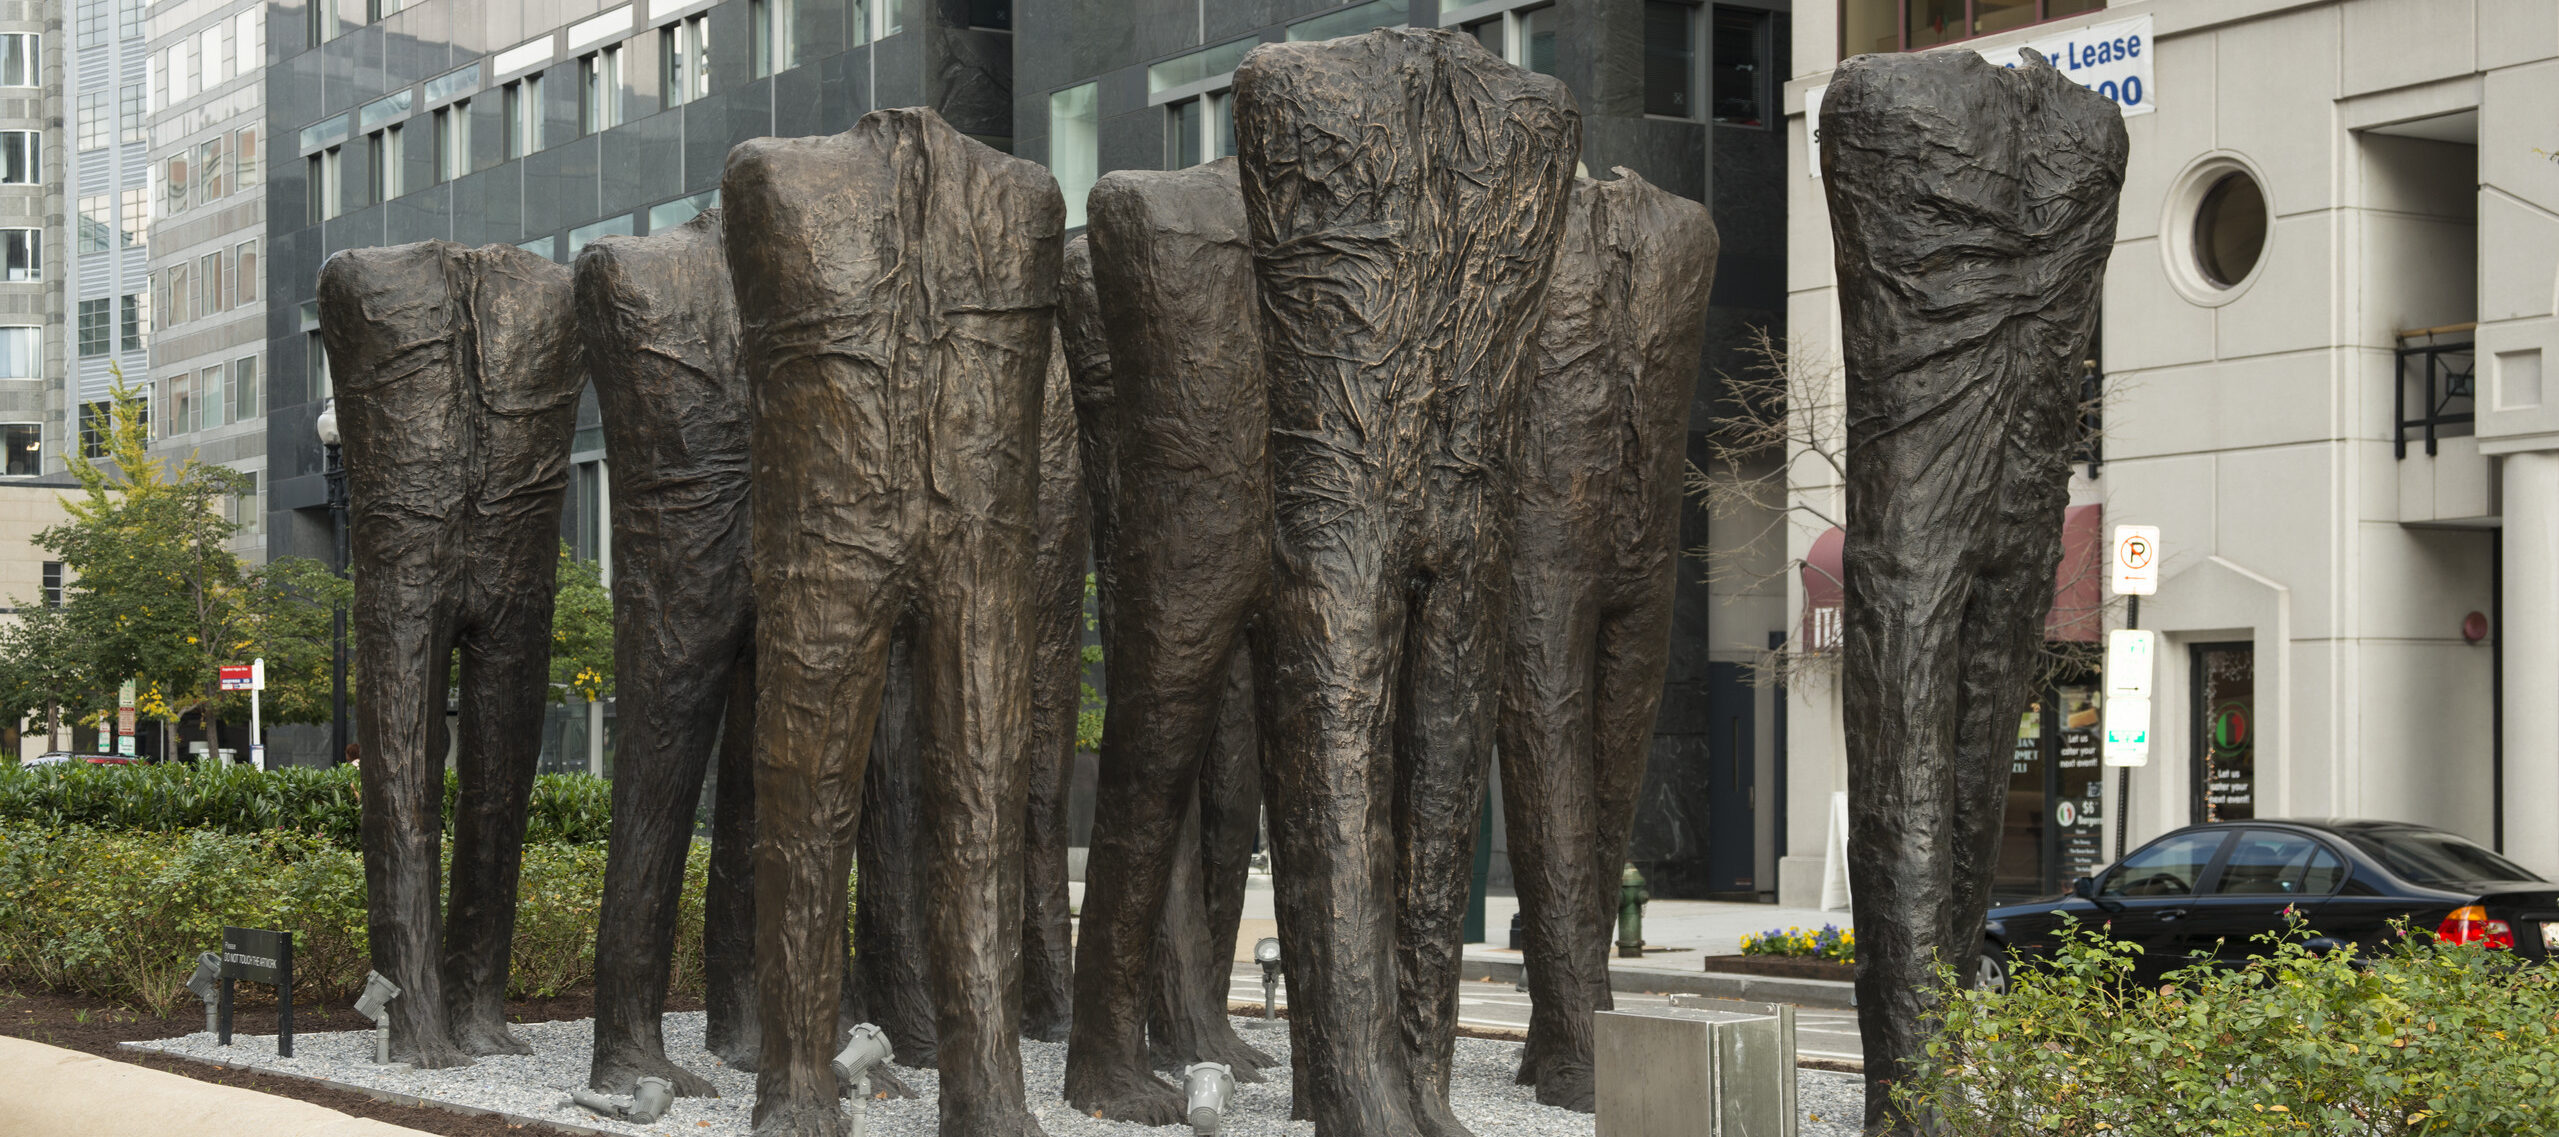 Ten larger-than-life bronze sculptures of human bodies are installed in the middle of a city street. The bodies have no heads or arms, and are striding forward in five rows of two. While they are not naked, their wrinkled body-tight clothing makes no distinction between shirt and pants.